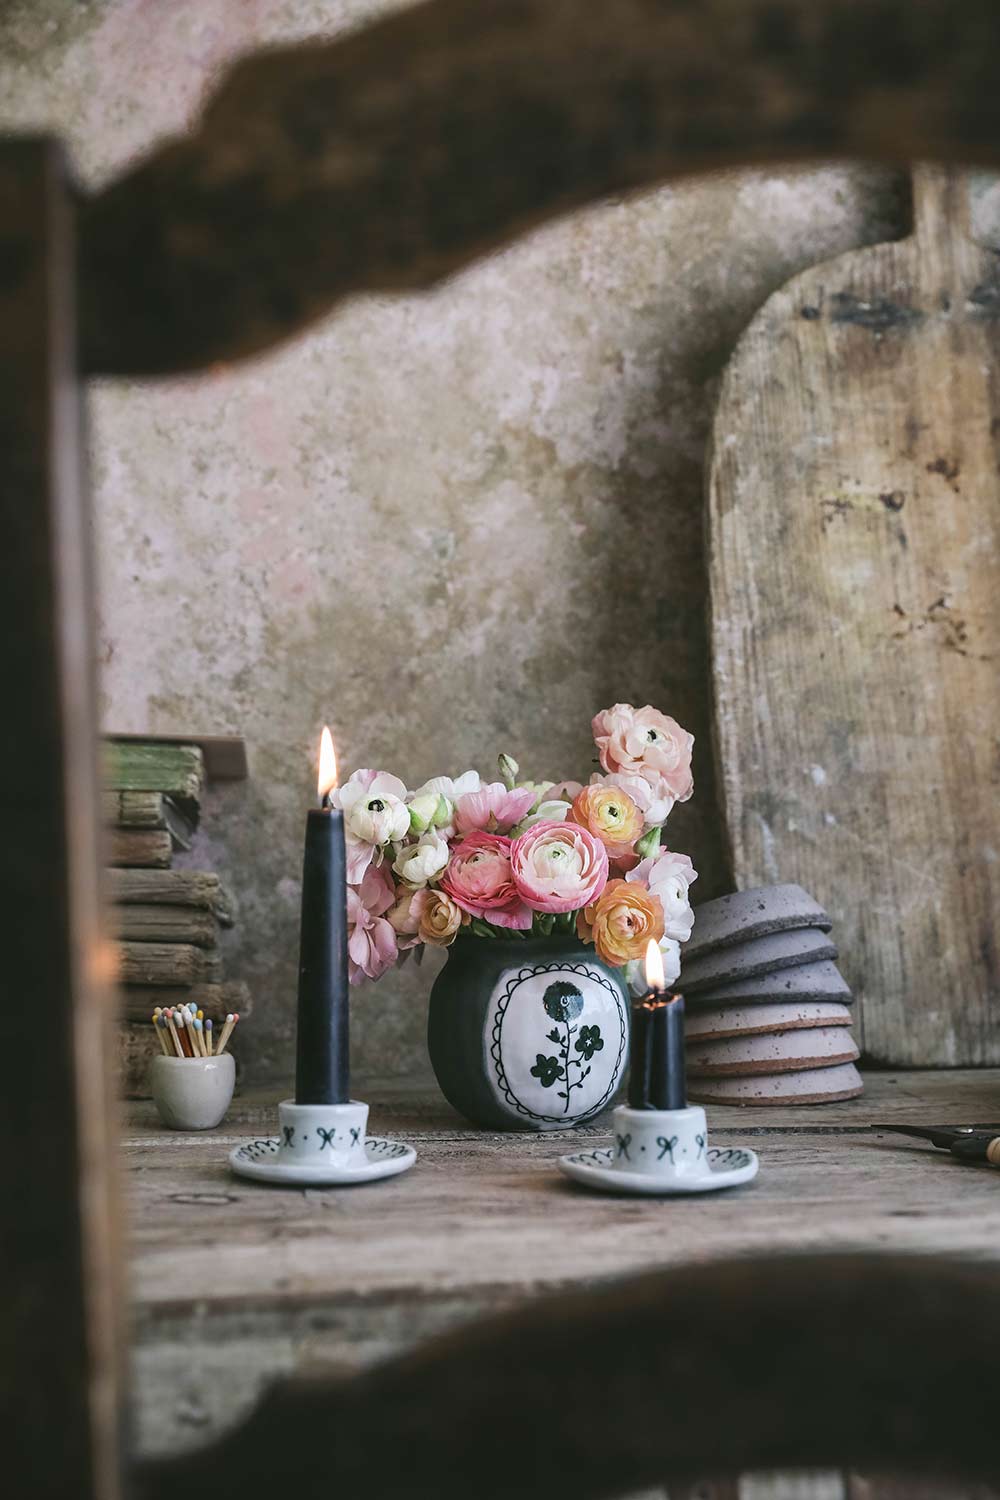 Hand-painted Ceramic Candle Holder